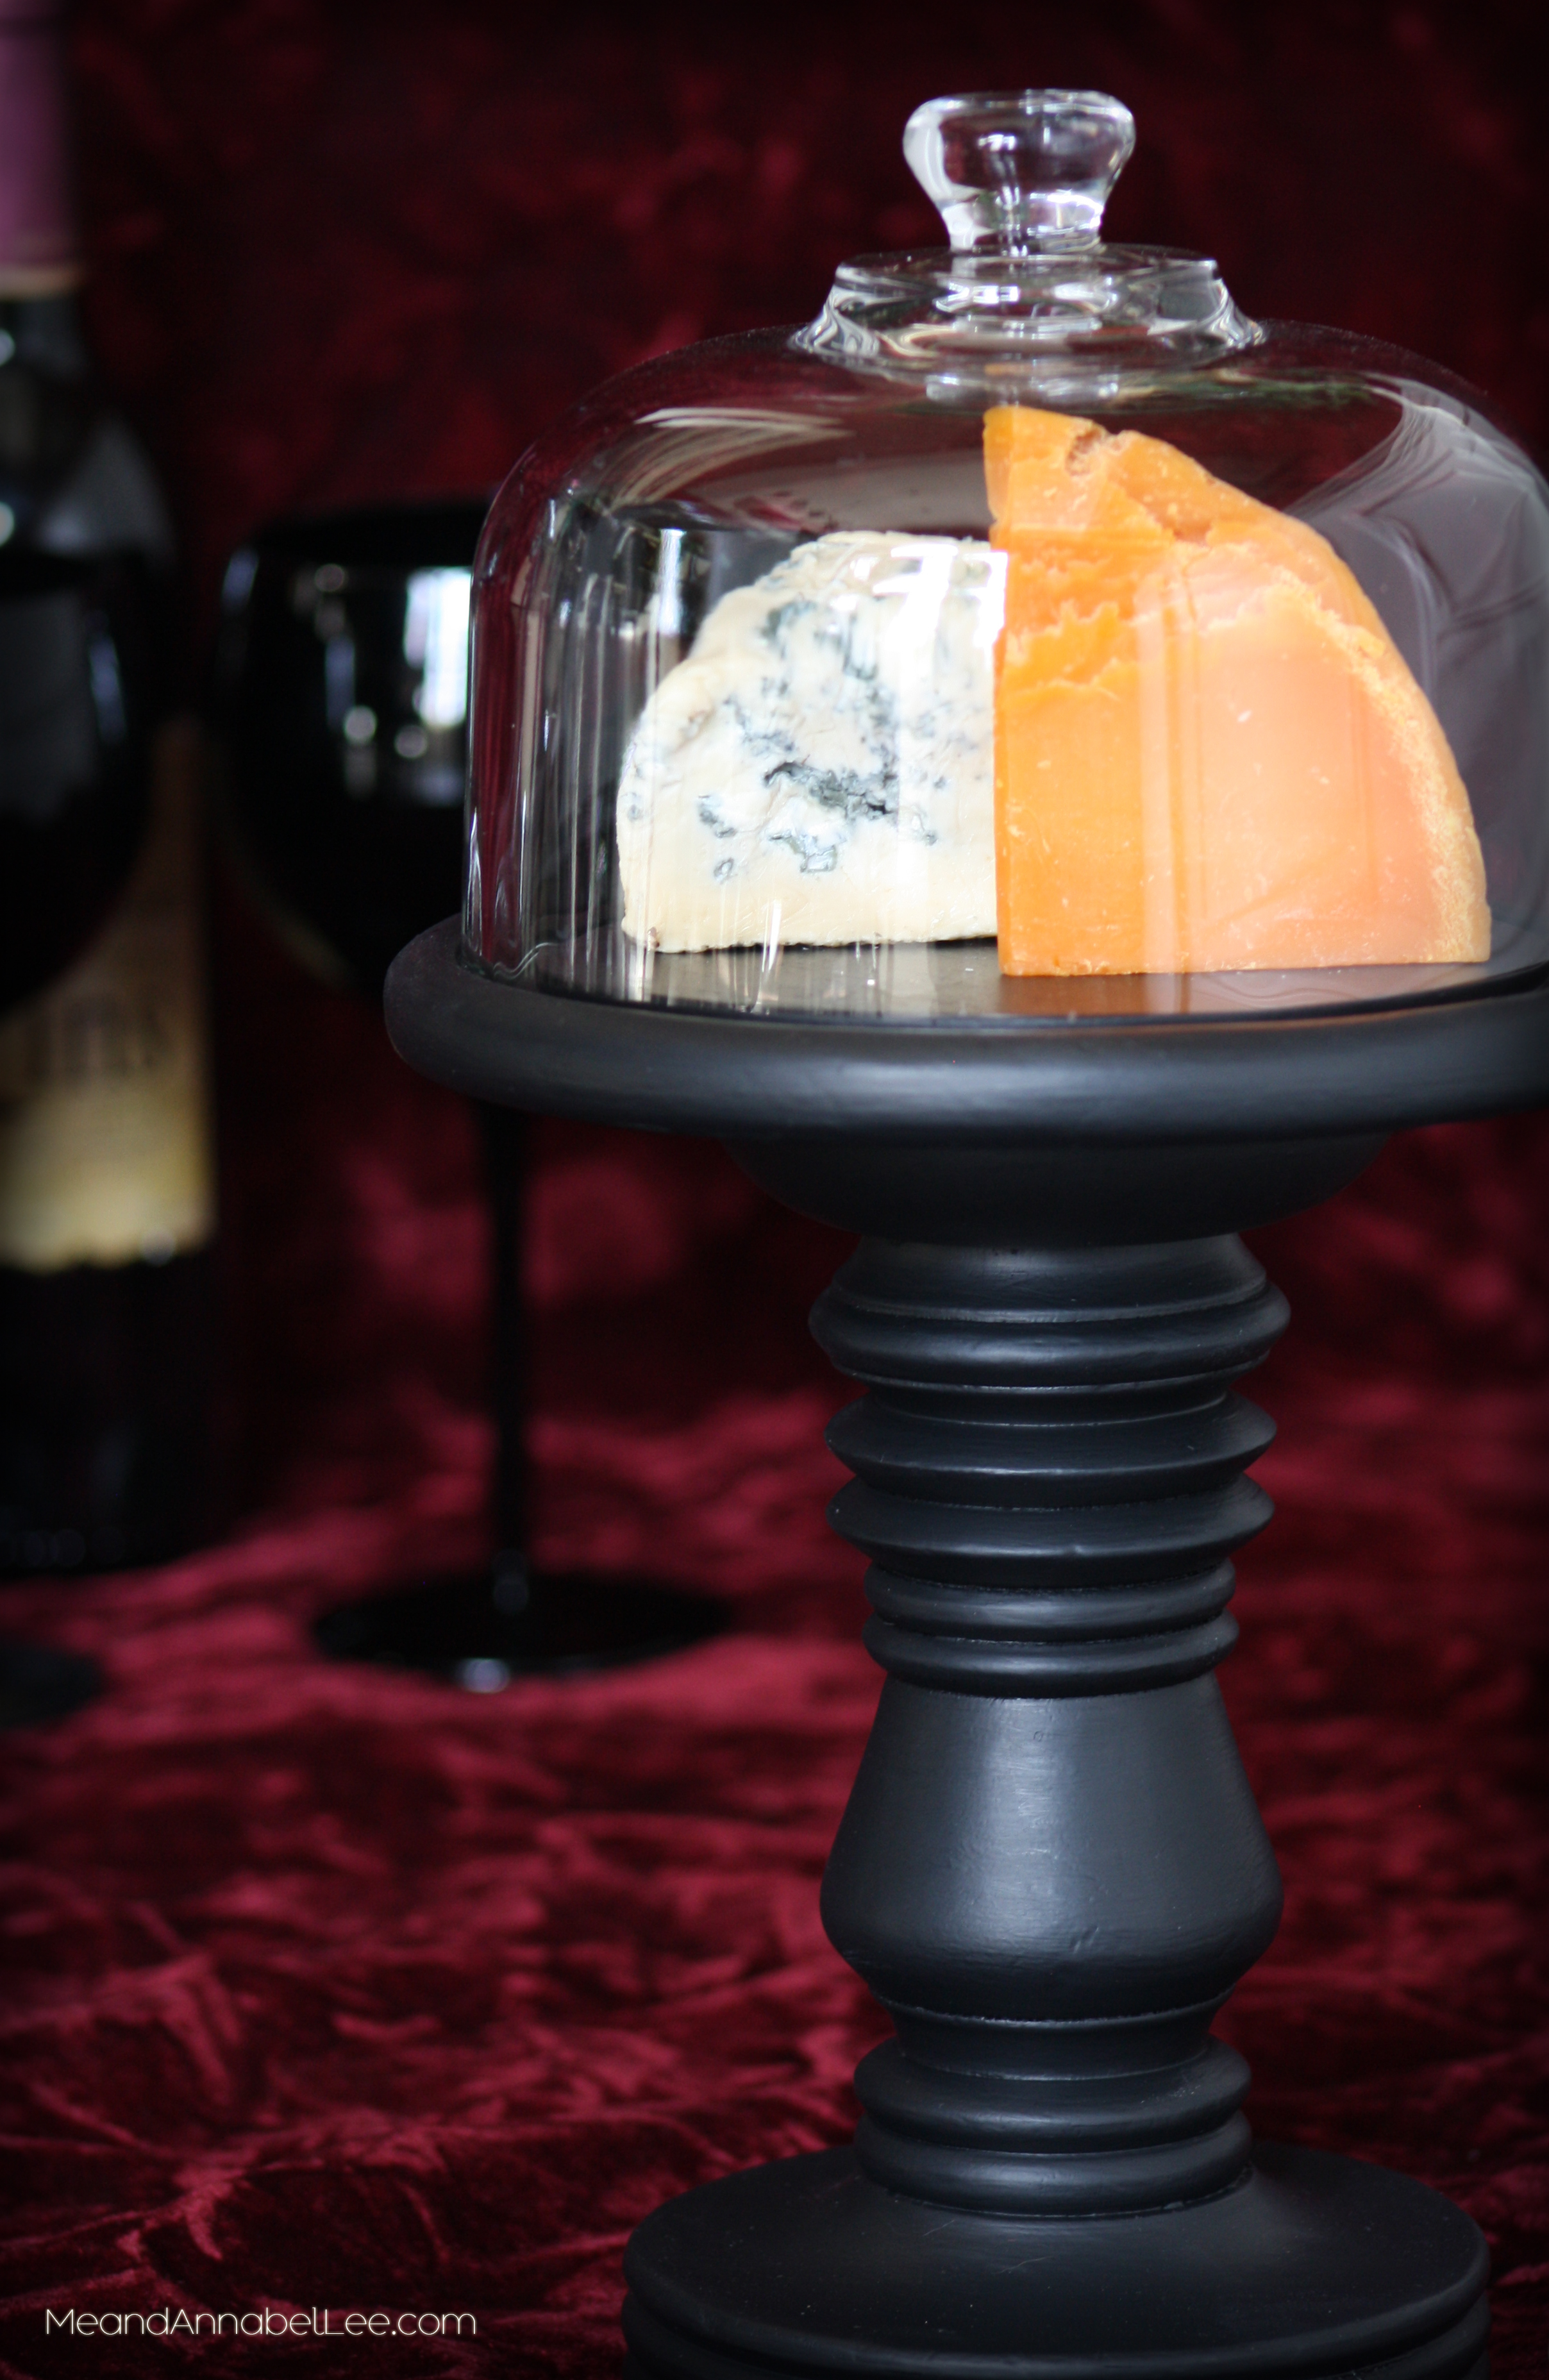 DIY Black Cloche Cheeseboard Pedestal - Goth It Yourself - Gothic Decor - Dark Entertaining - Glass Dome Wooden Cheesetray - Trash to Treasure - Thrift Shop Finds - www.MeandAnnabelLee.com - Blog for all things Dark, Gothic, Victorian, & Unusual